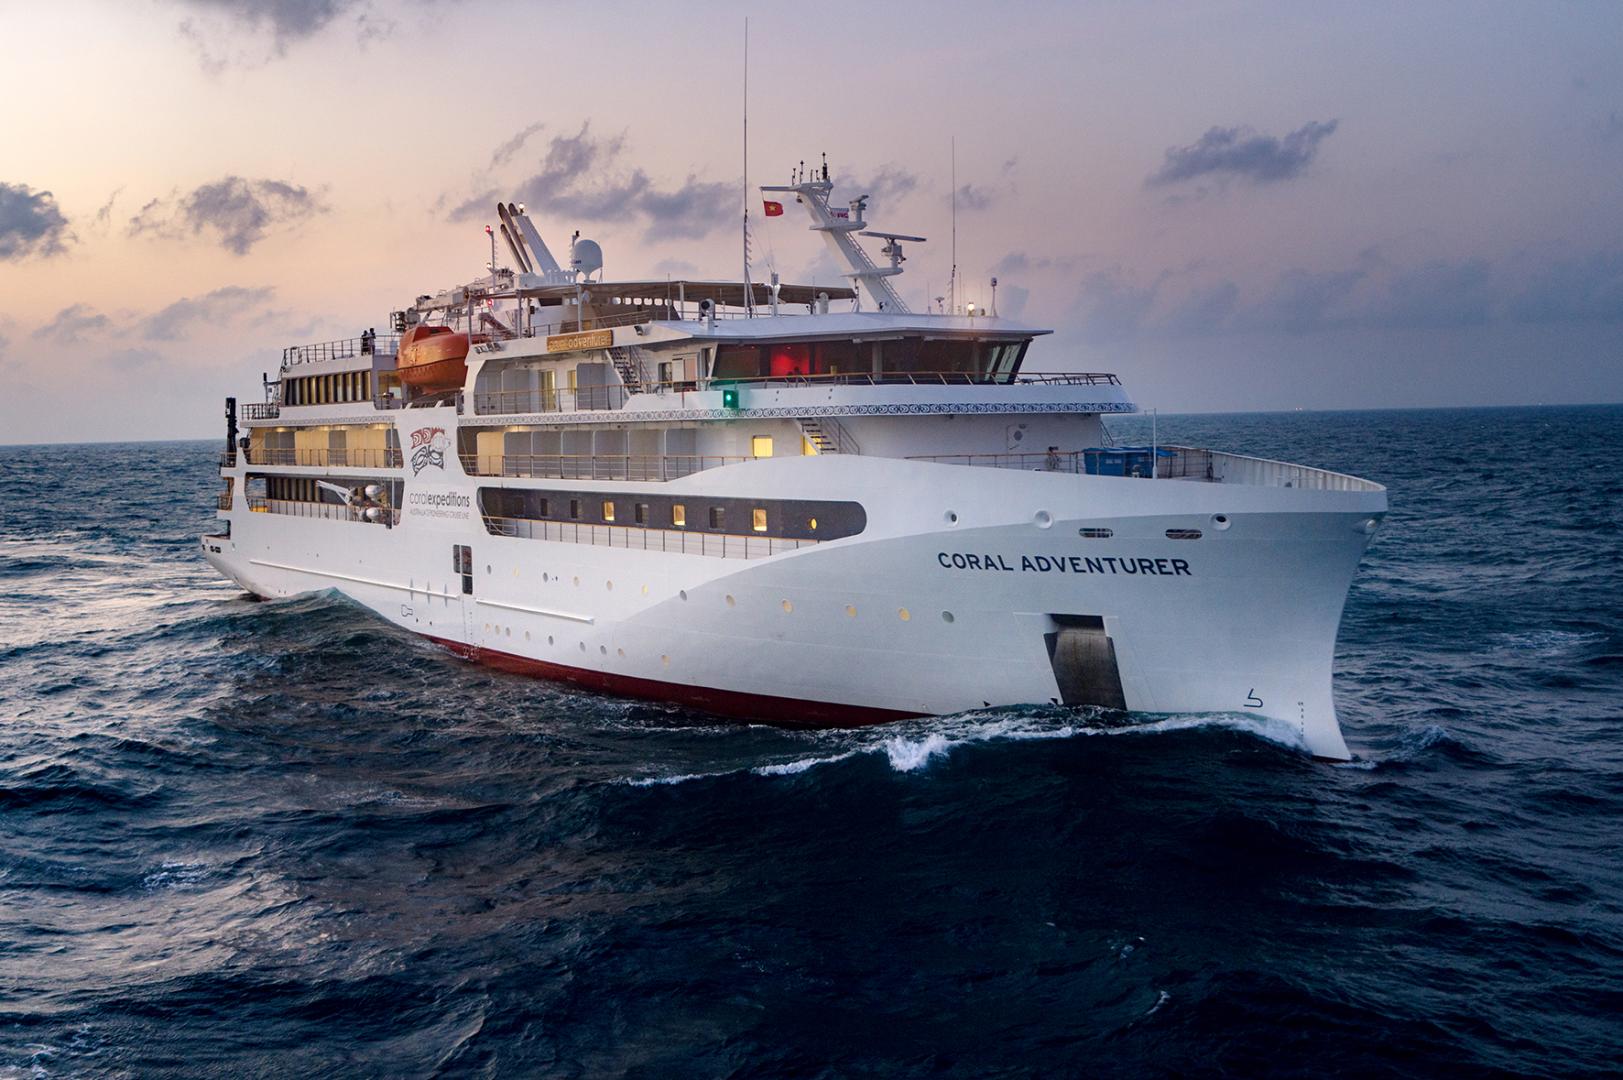 Vard will build a second cruise vessel for Coral Expeditions